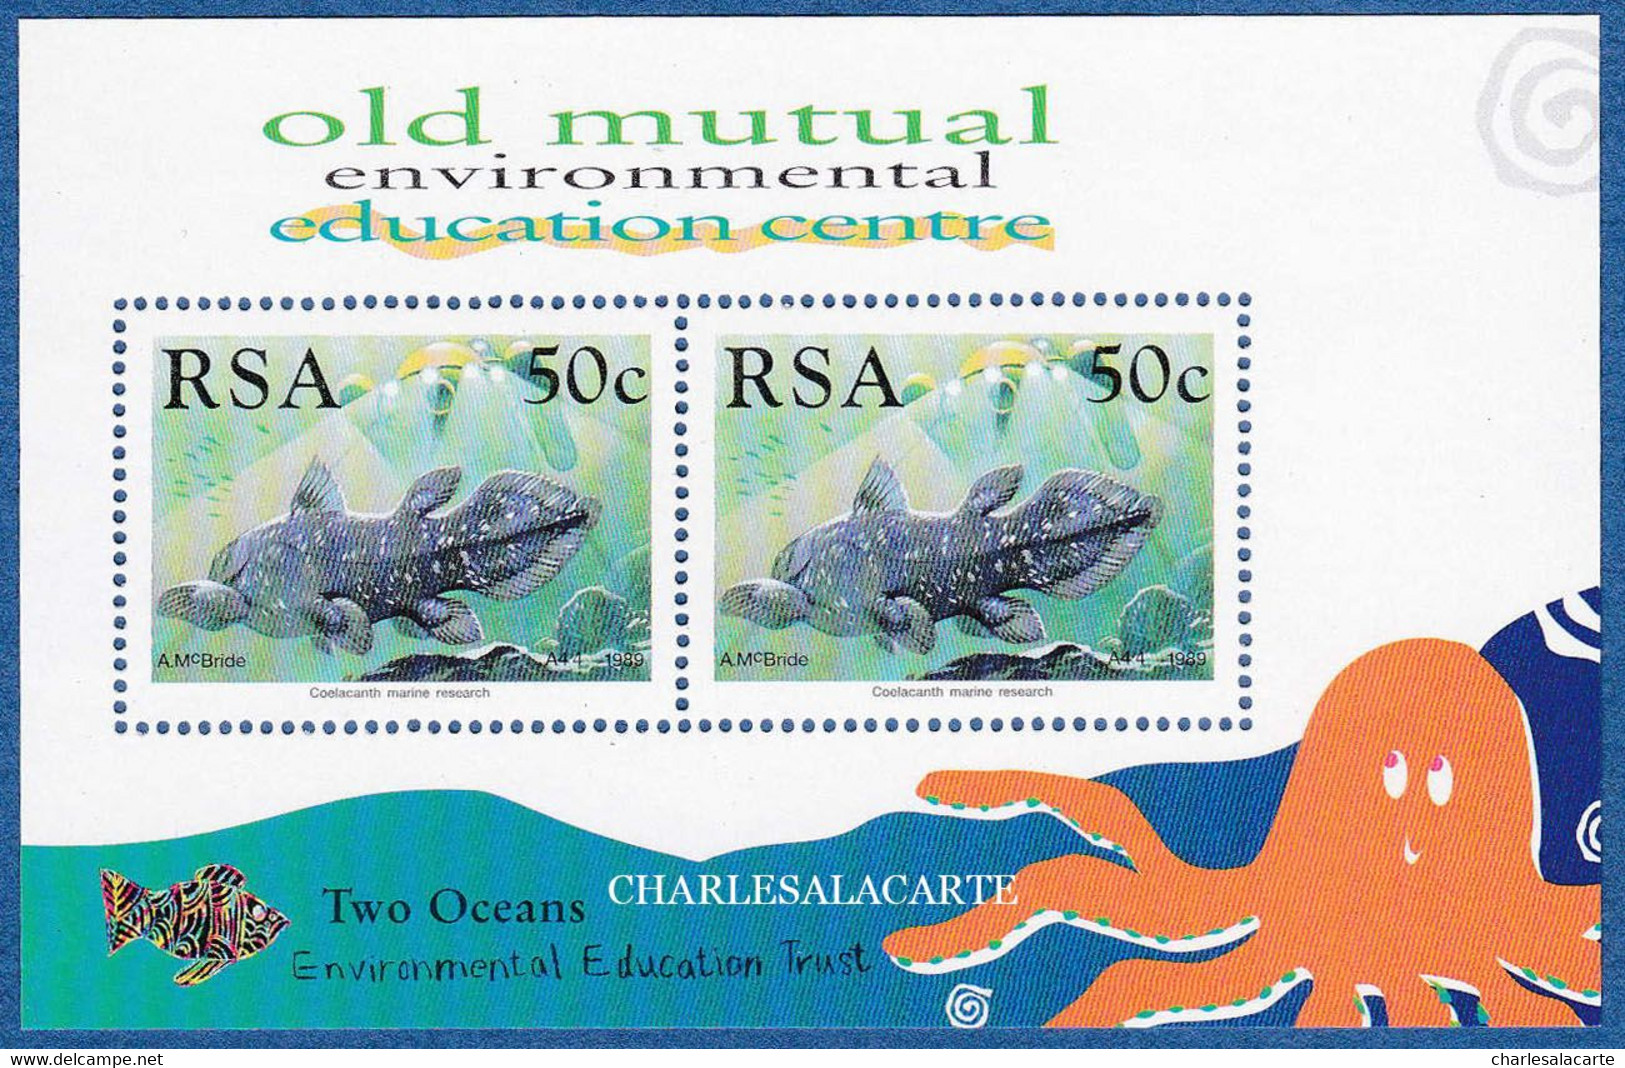 SOUTH AFRICA  1989  COELACANTH DISCOVERY M.S. OLD MUTUEL  S.G. 680 (2) M.S.  U.M. - Blocks & Sheetlets